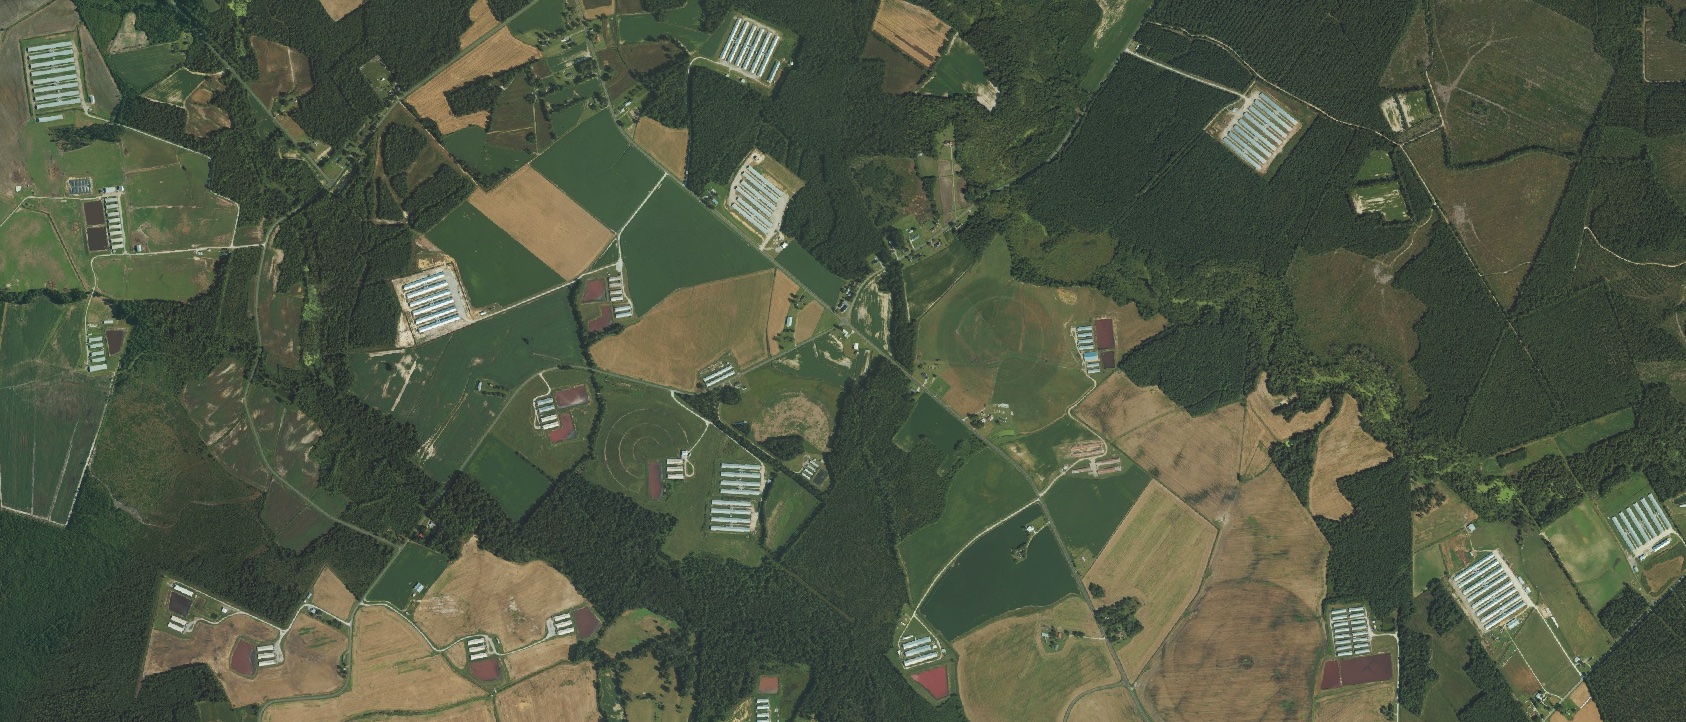 Aerial image of poultry and swine CAFOs (concentrated animal feeding operations) in the coastal plain of southeastern North Carolina adjacent to the Northeast Cape Fear River. 